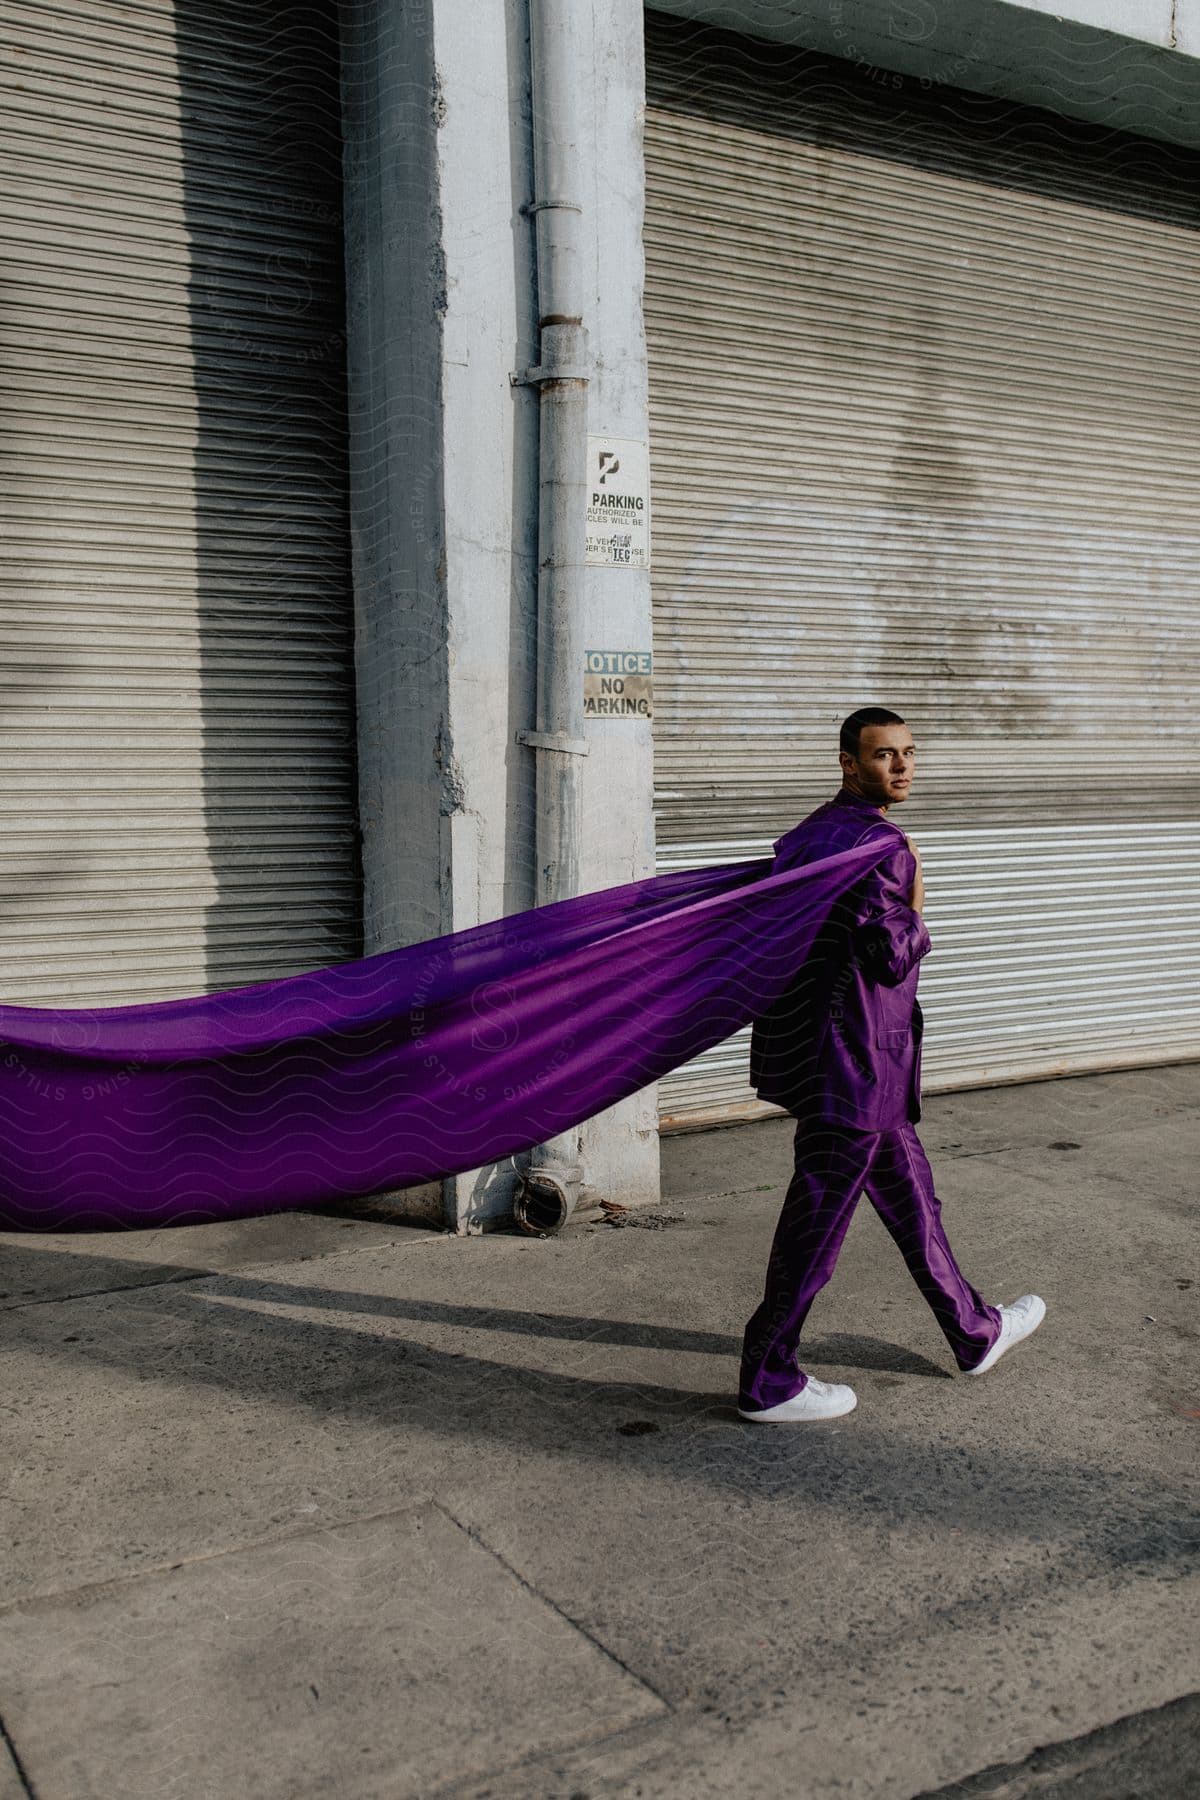 A man in a purple suit walks down the street past closed warehouse doors